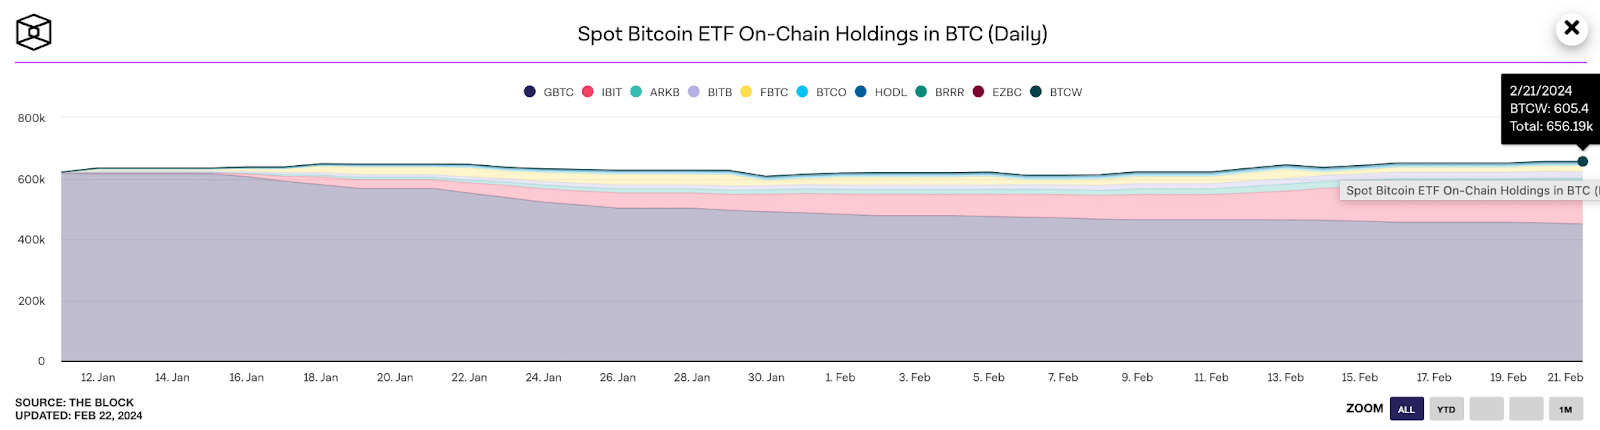 Bitcoin ETFs dialed down their buying trend this week. Feb. 19 - Feb. 22